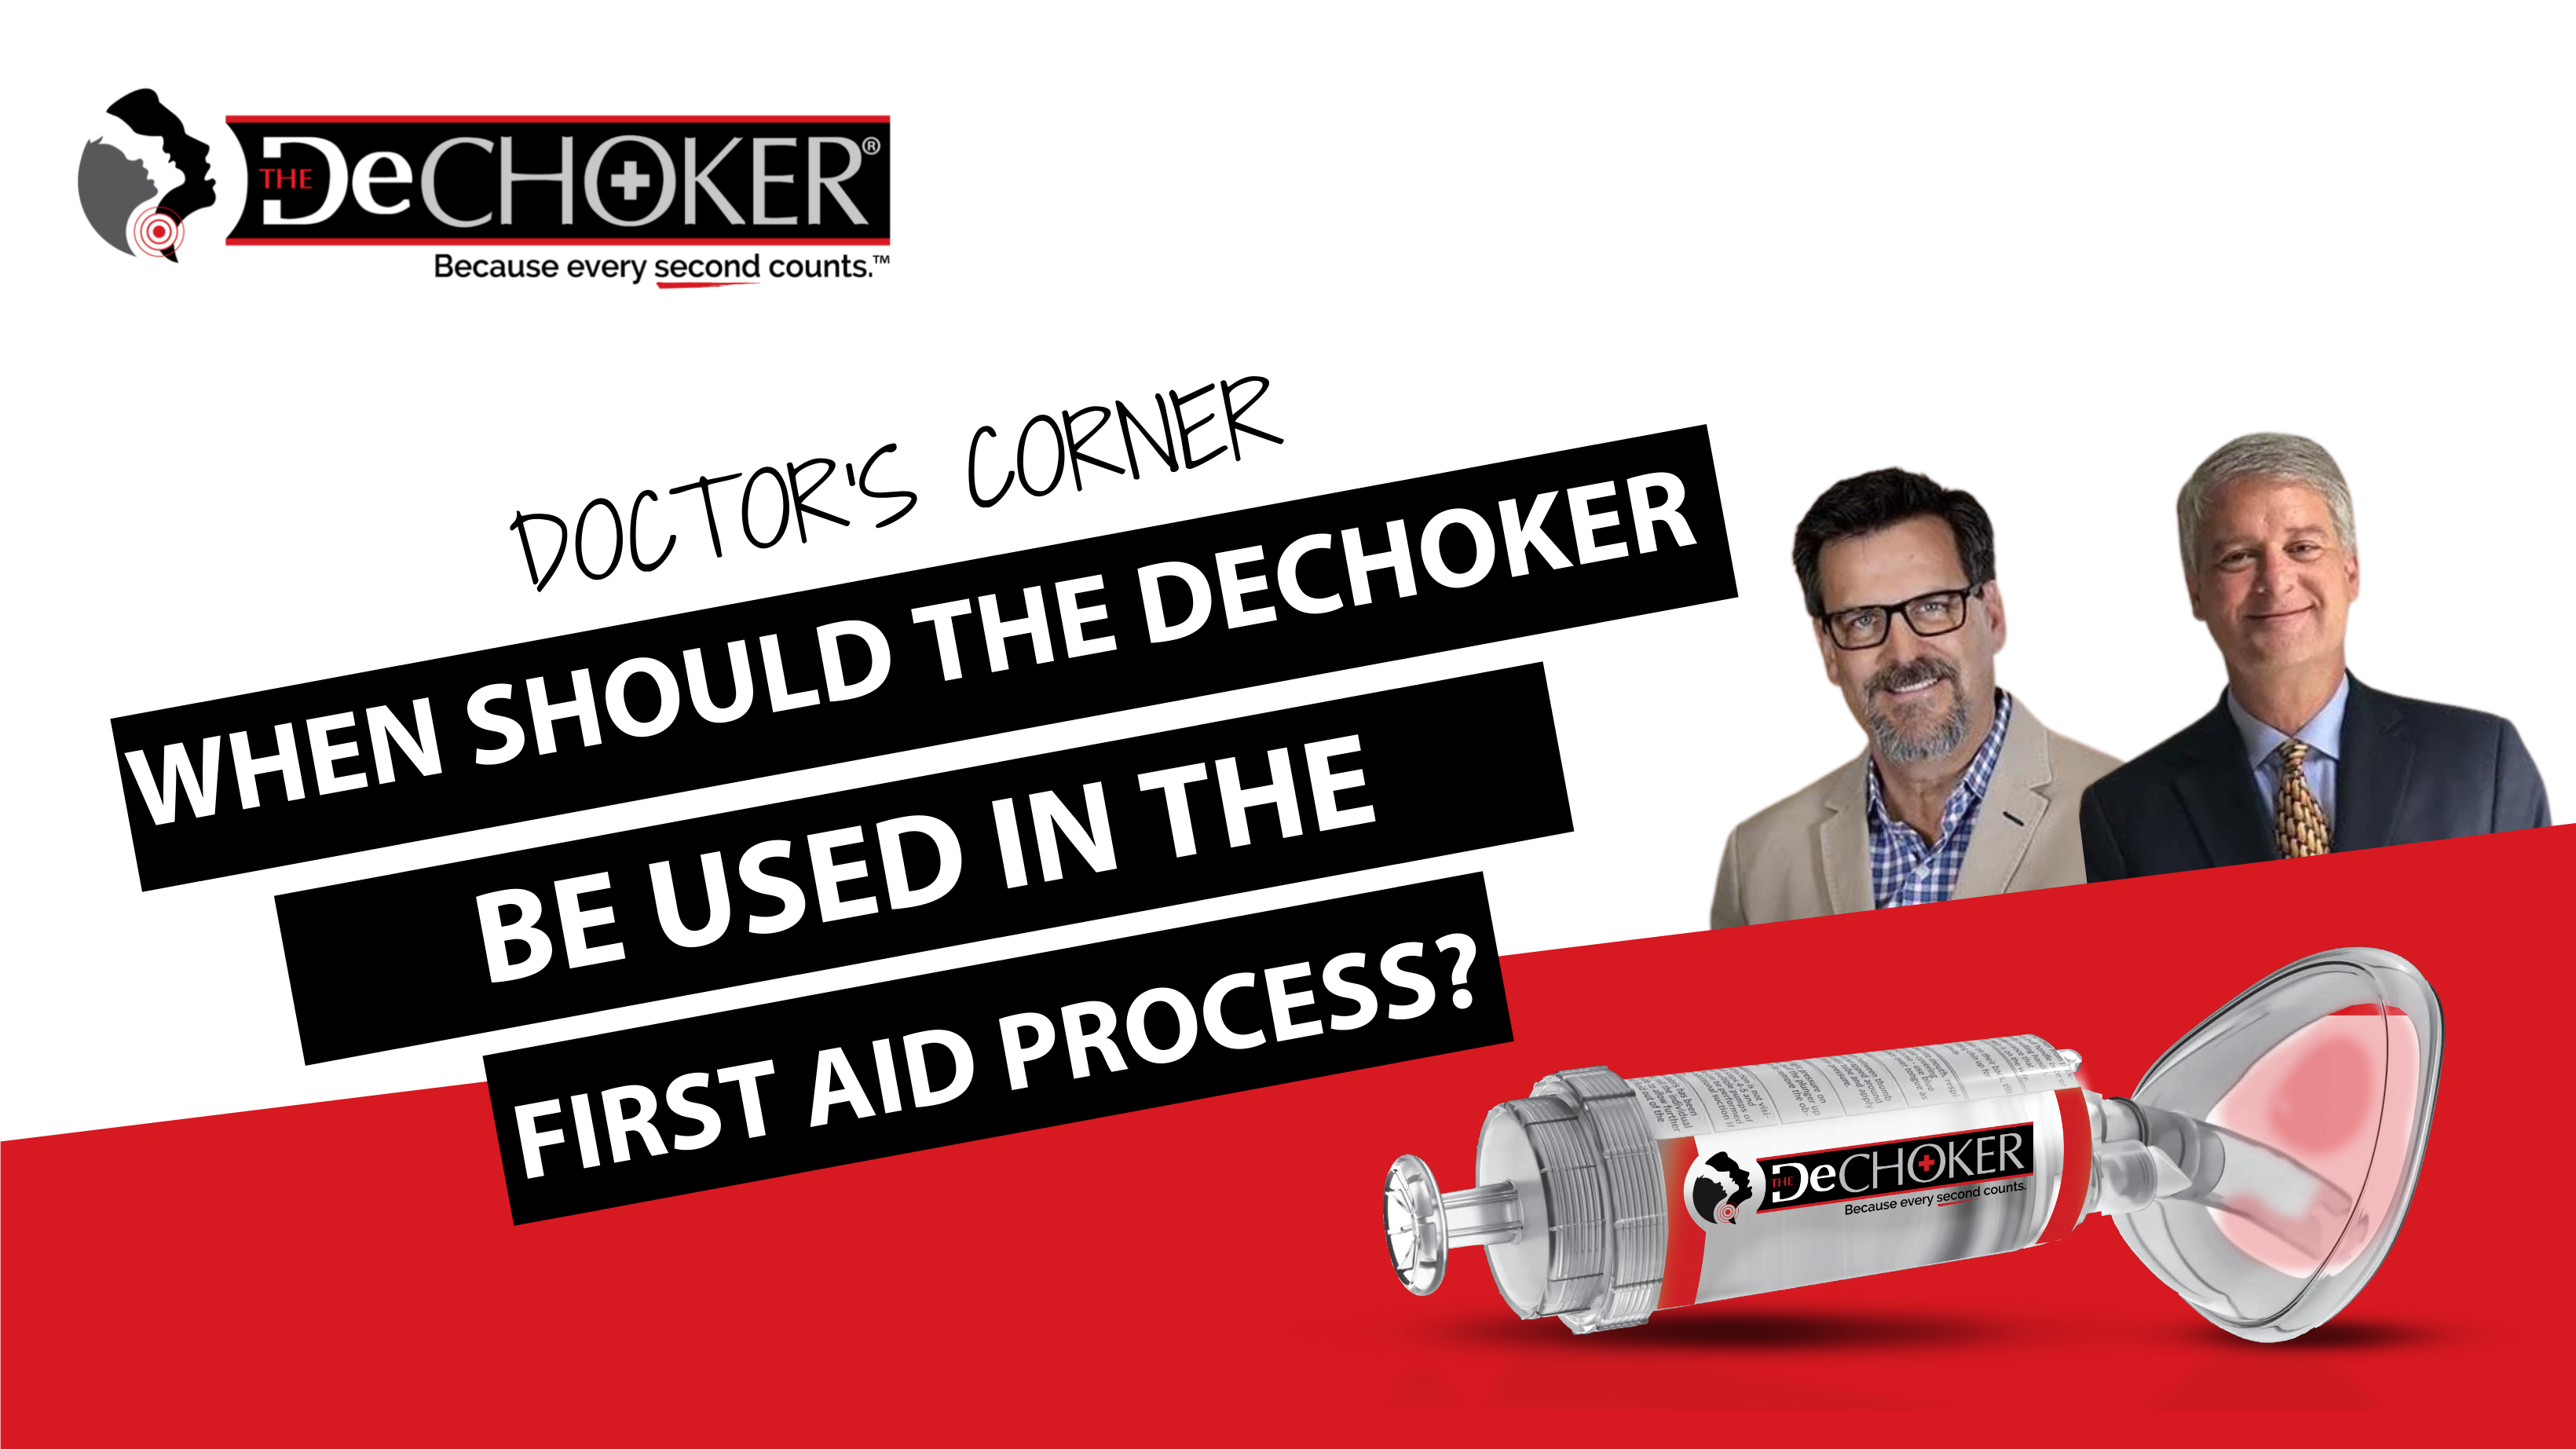 When should the Dechoker® be used in the first aid process of choking?